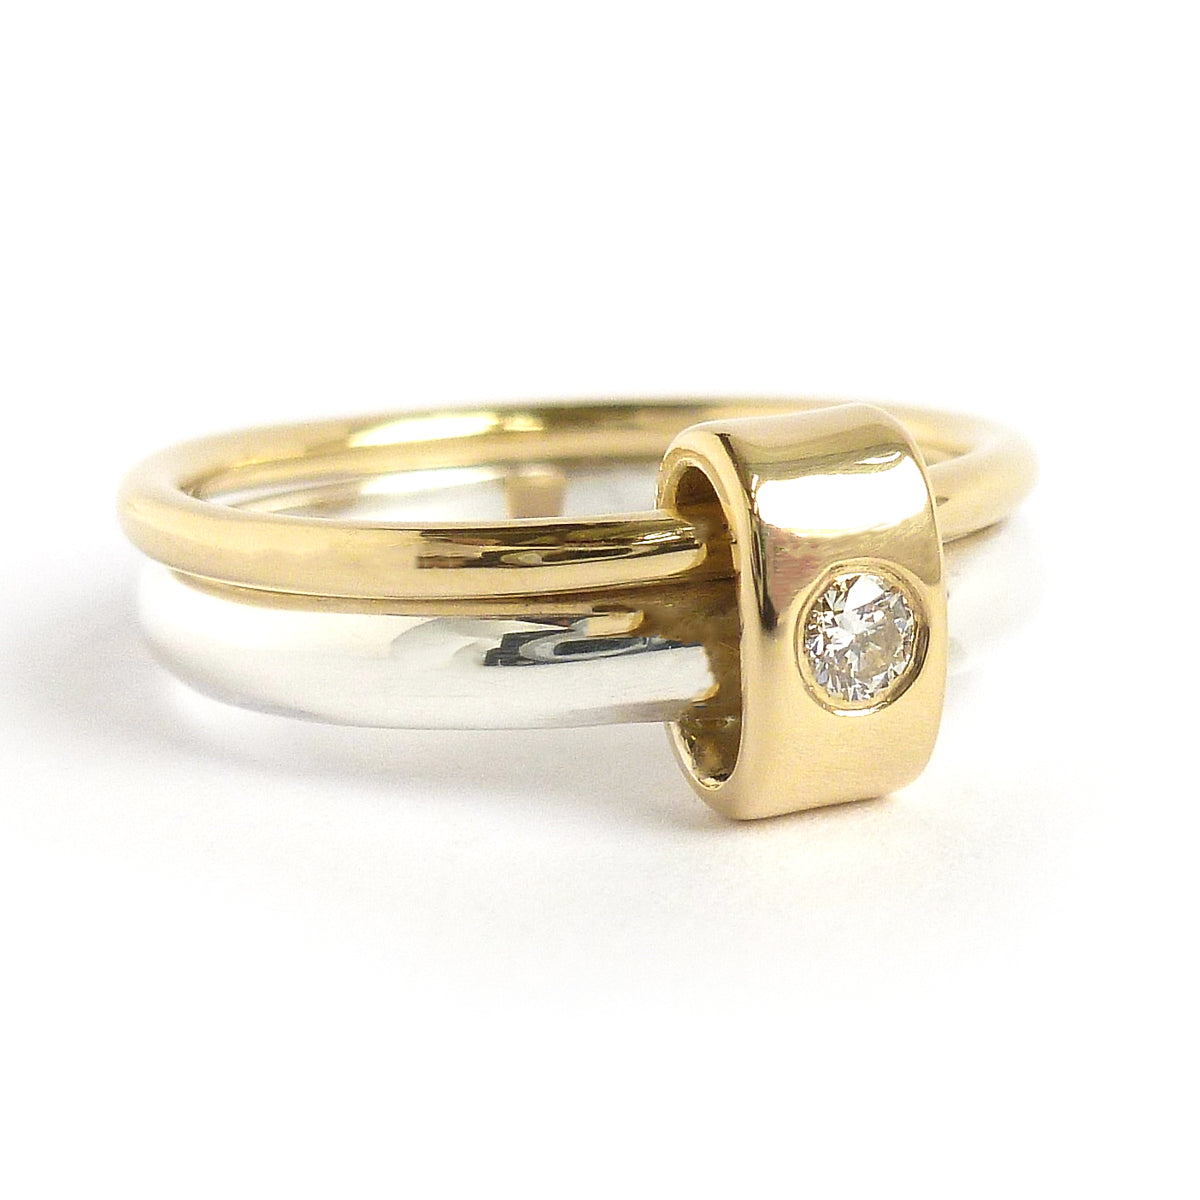 Contemporary jewellery engagement ring. Remodelling commissioning.